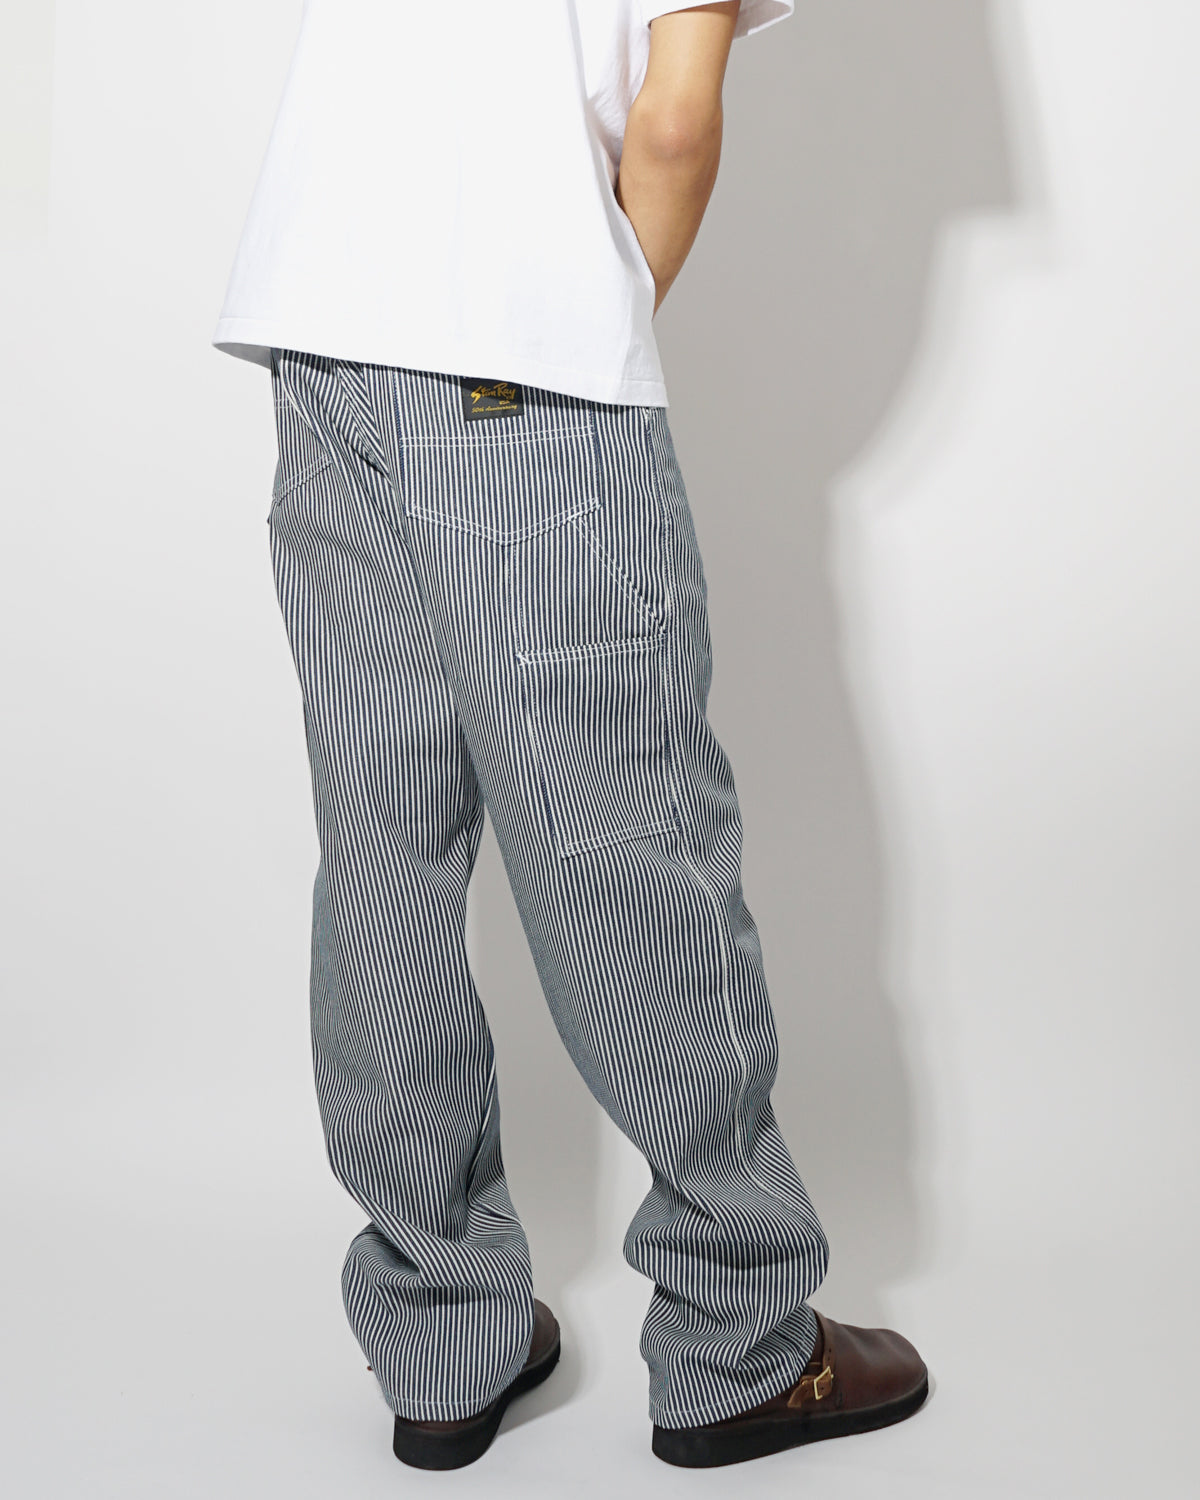 Painter Pants / Hickory